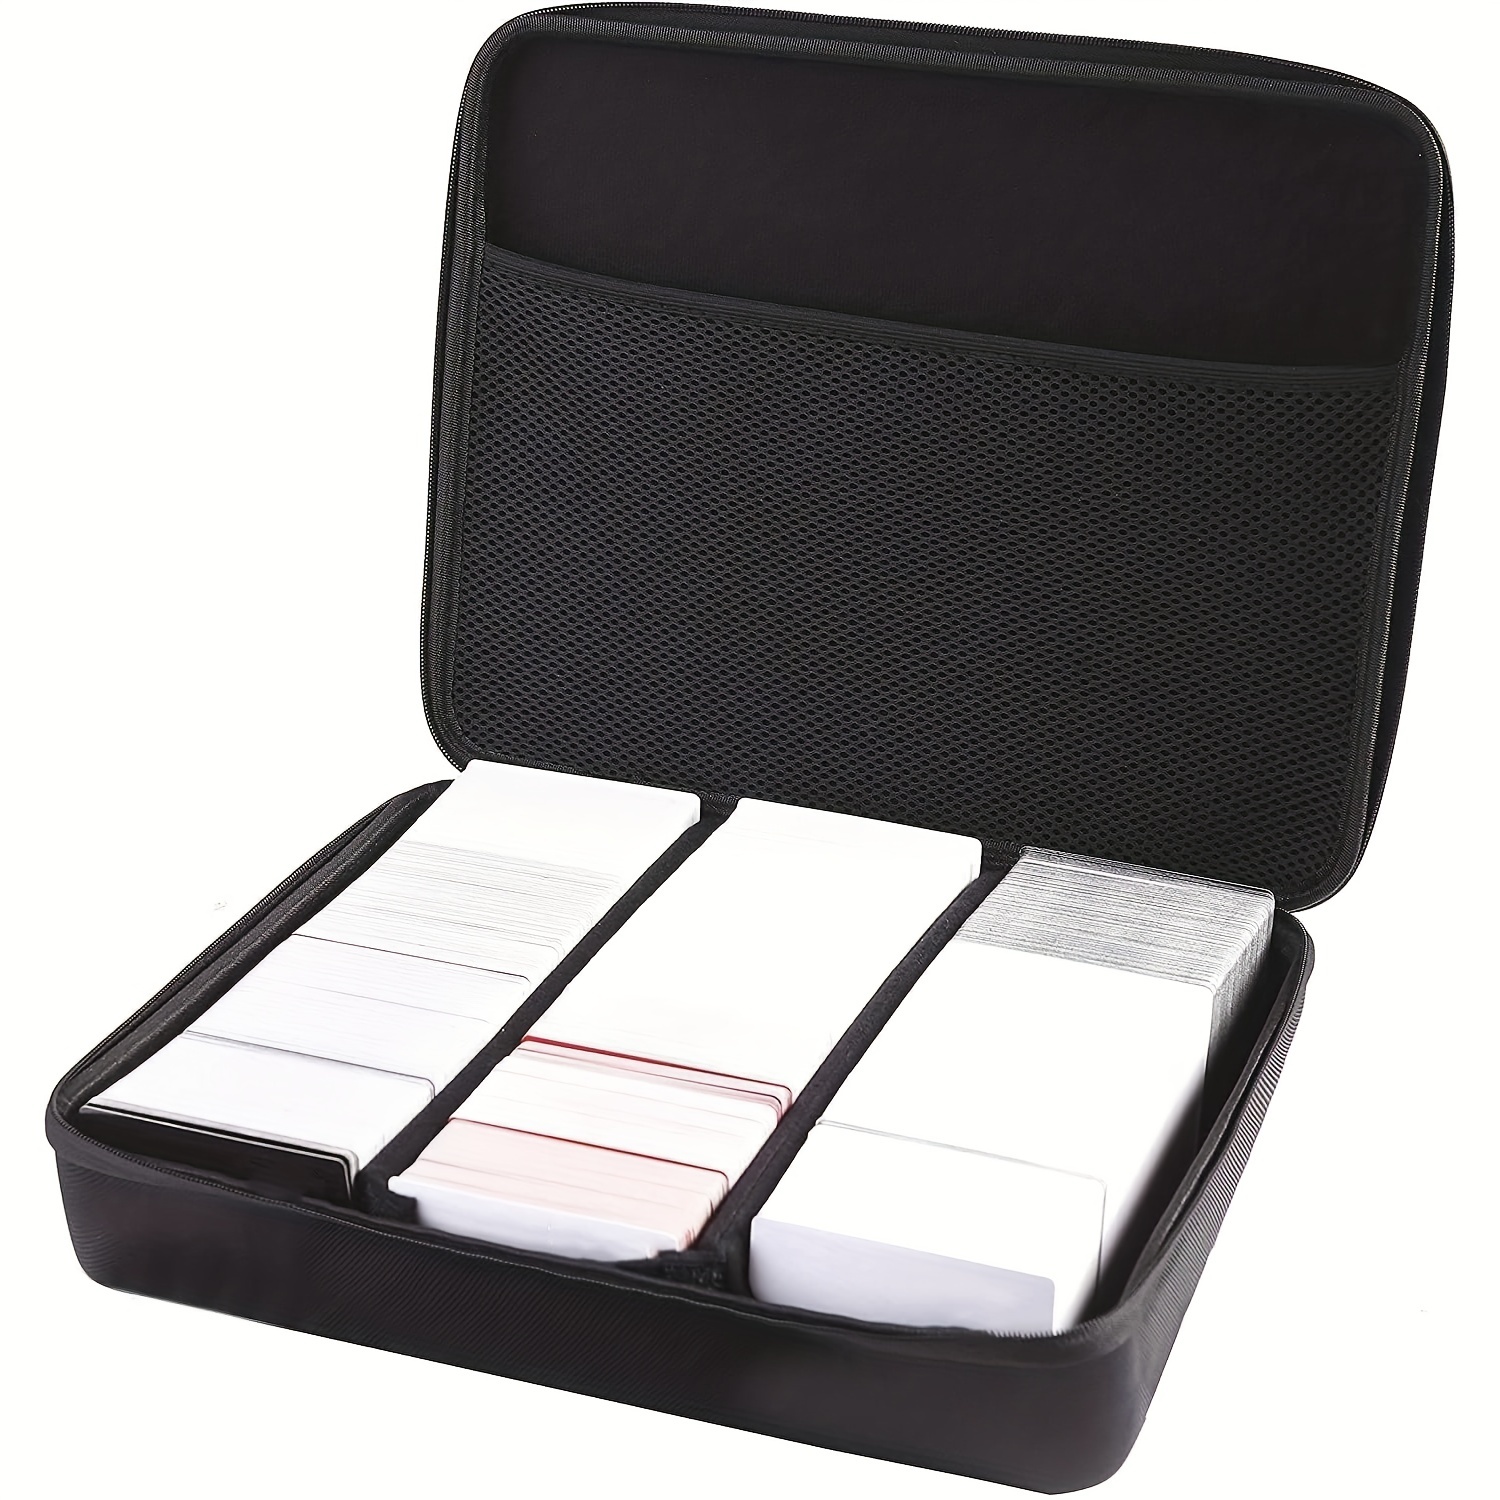 COMECASE Card Holder Case, Card Game Storage Organizer Box Holds up to 400  Cards - Carton 